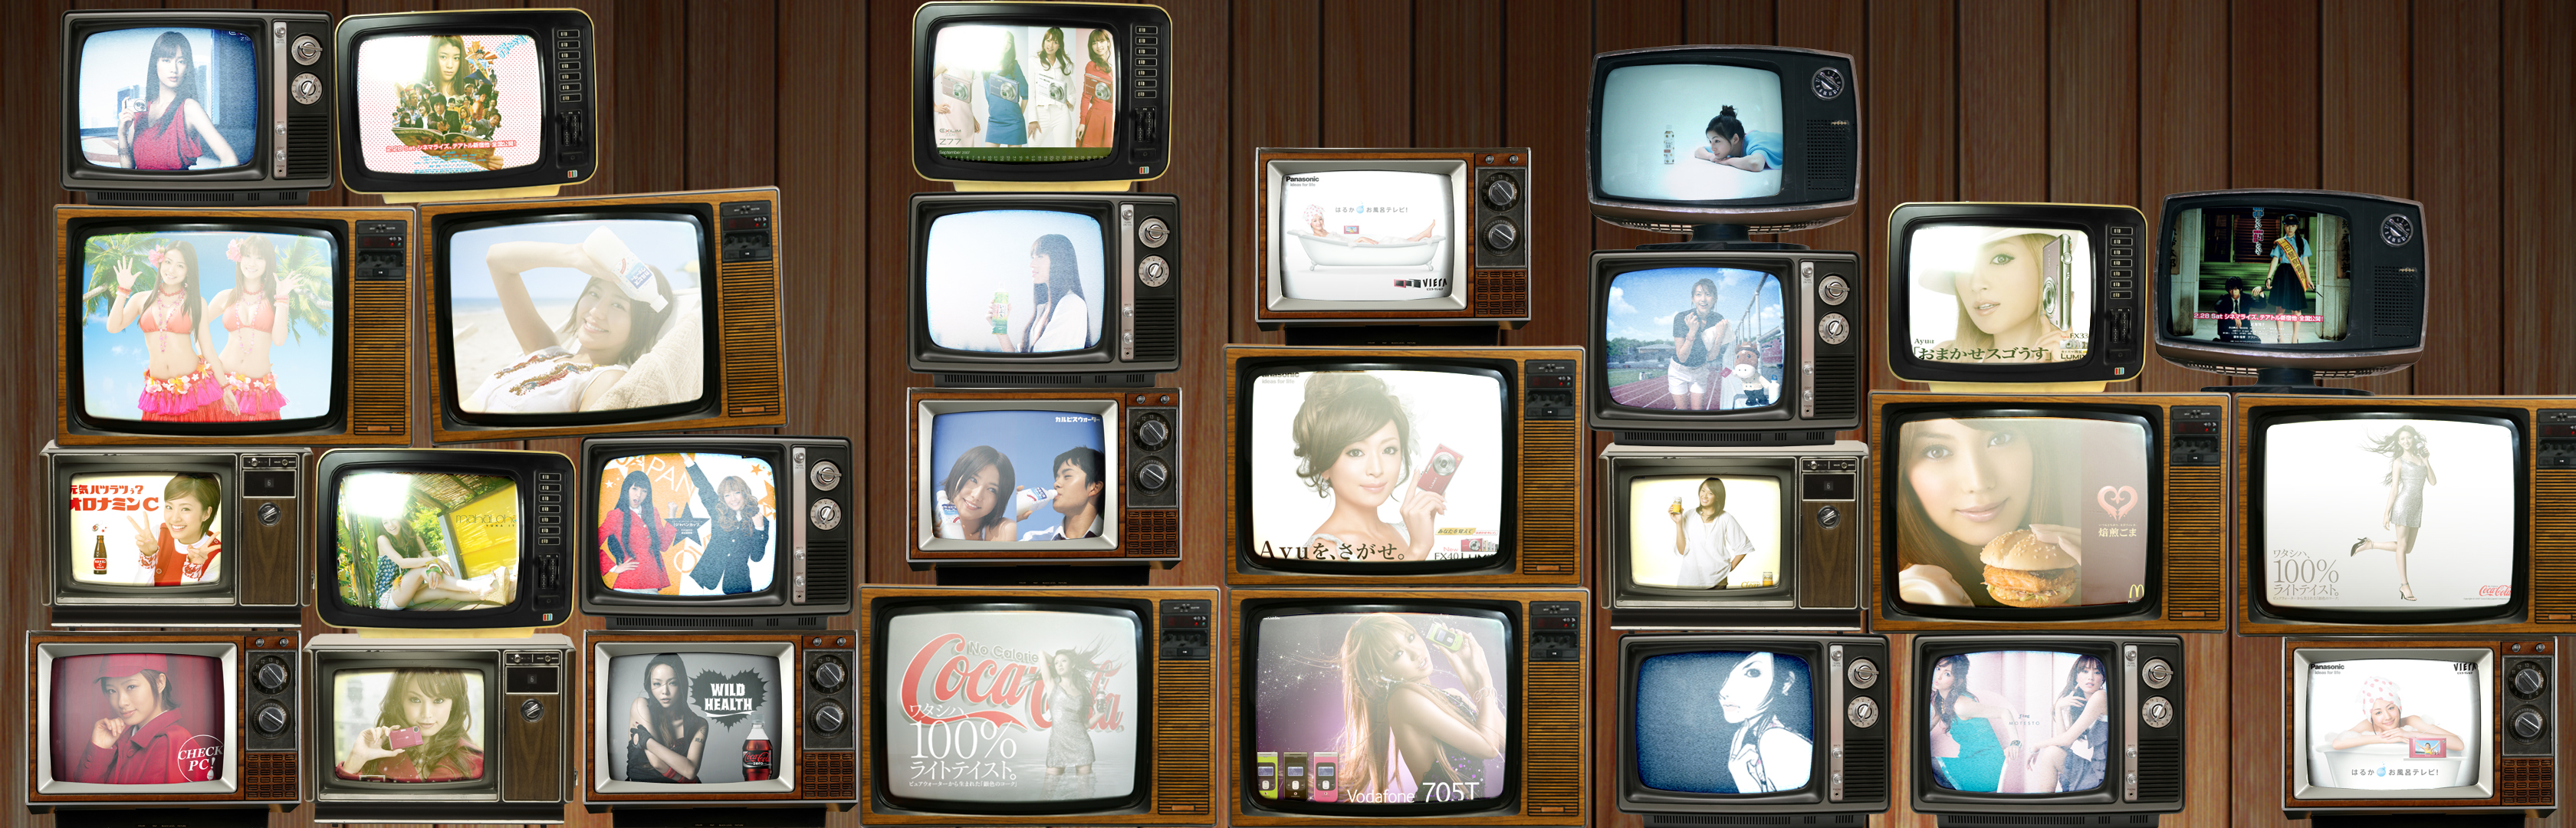 wall_of_televisions_by_loops_of_fury.jpg